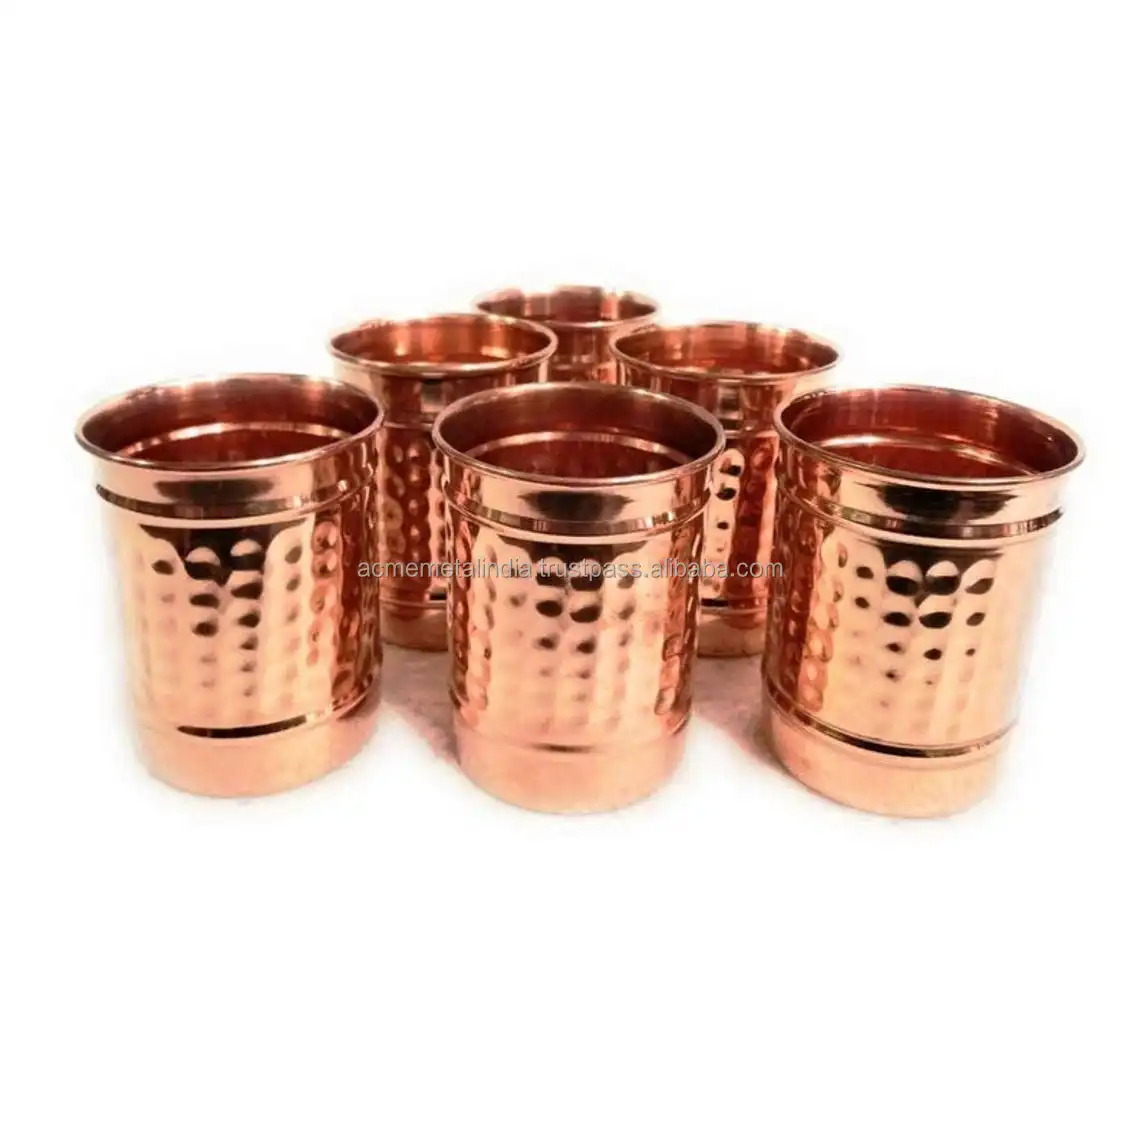 Pure Copper Hammered Glasses Moscow Mule Tumbler Hand Hammered Glass Set Tumblers Cup Mug Design Home Tableware Decors Accessory